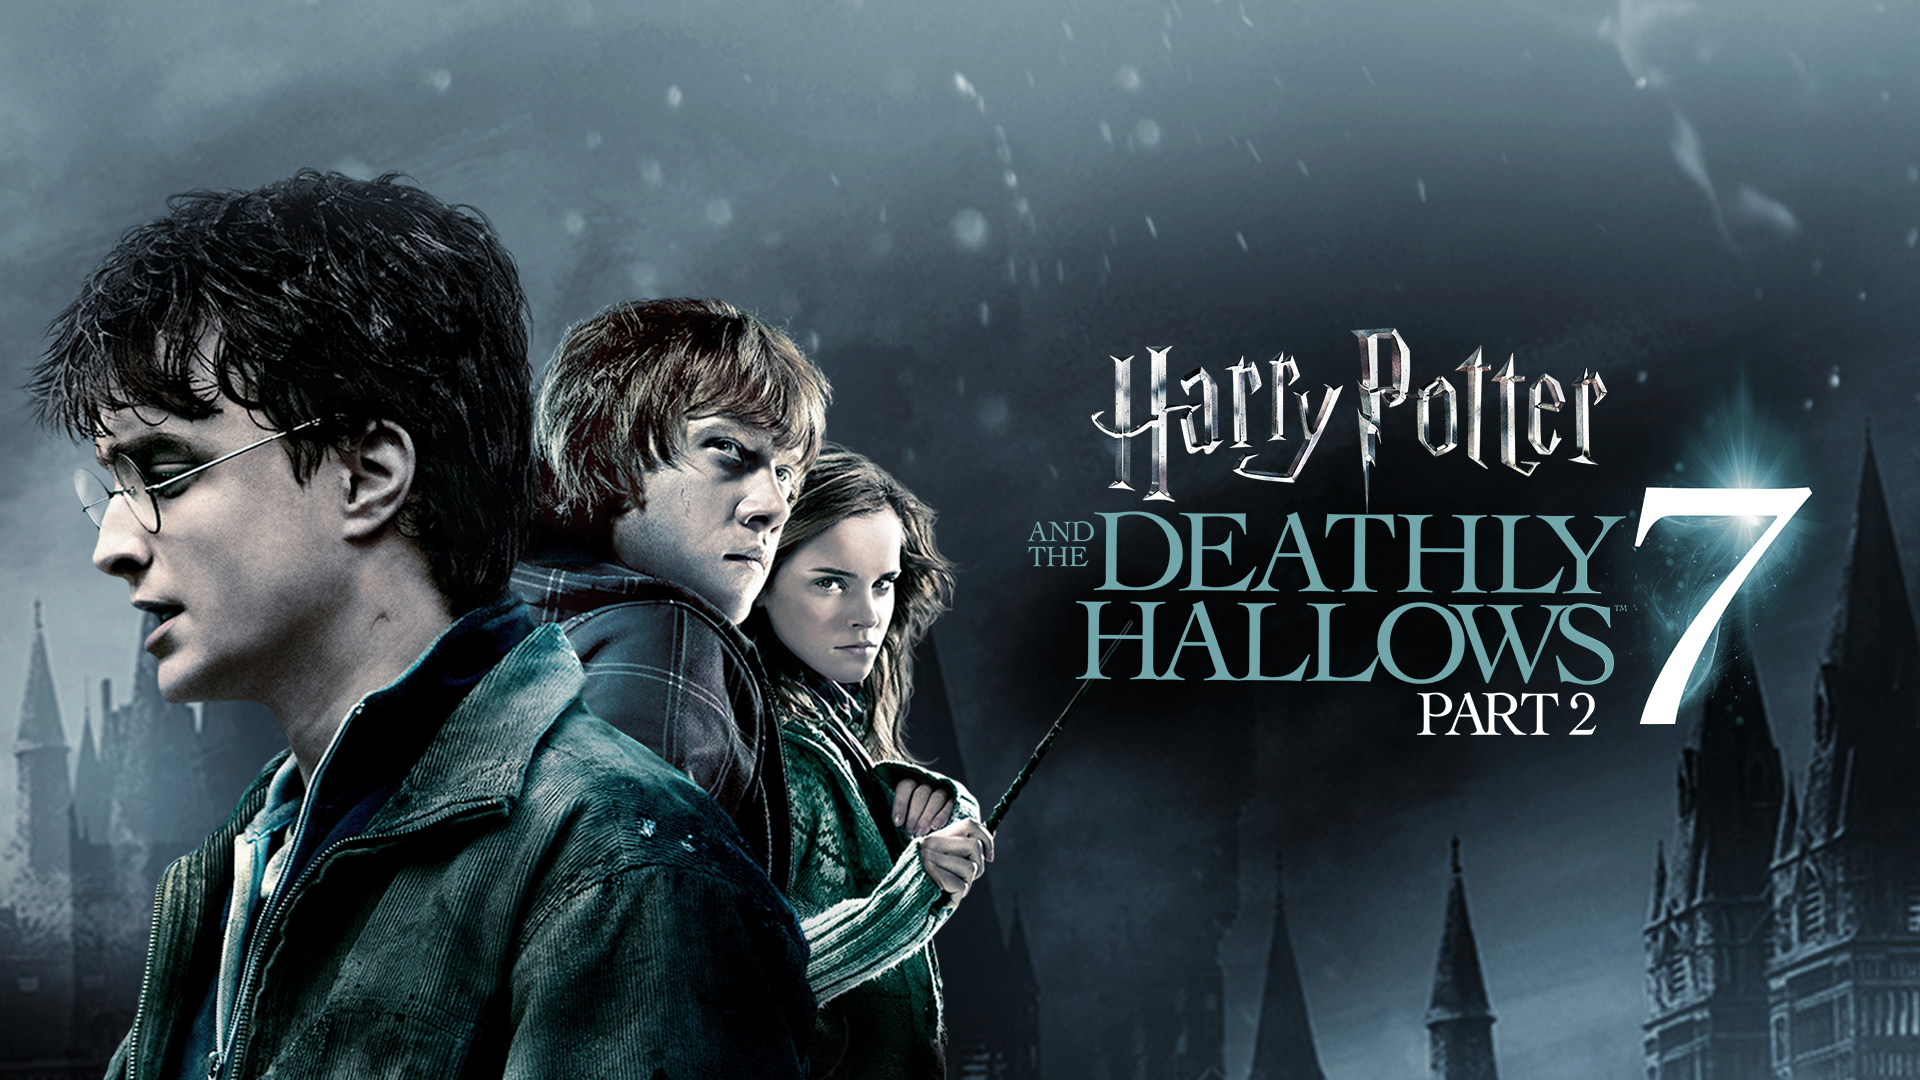 36-facts-about-the-movie-harry-potter-and-the-deathly-hallows-part-2